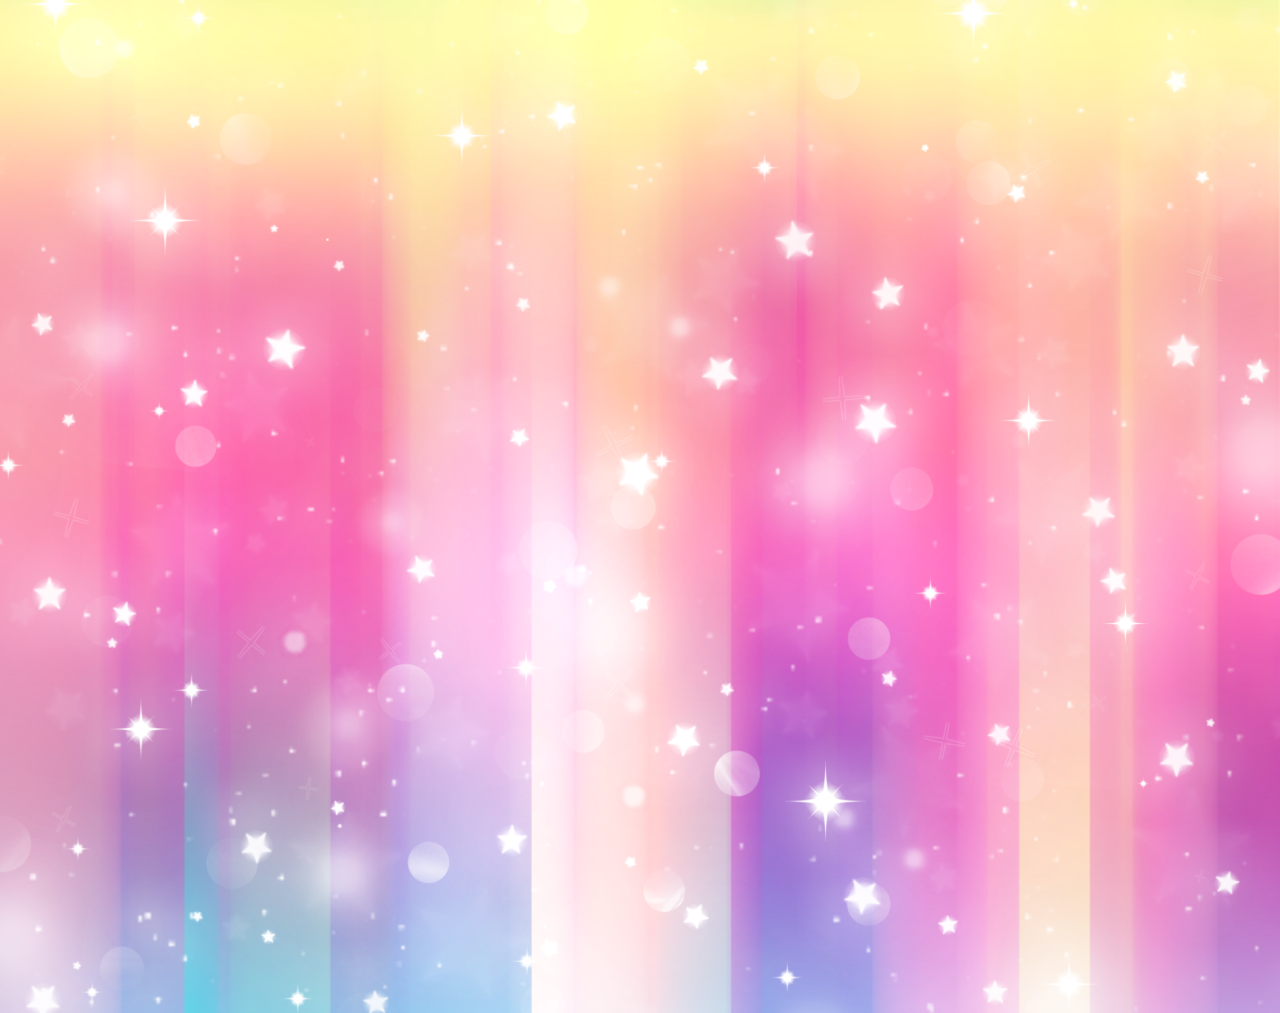 Themes Ive used, Sailor Moon Inspired Backgrounds - Part 2 Part 1